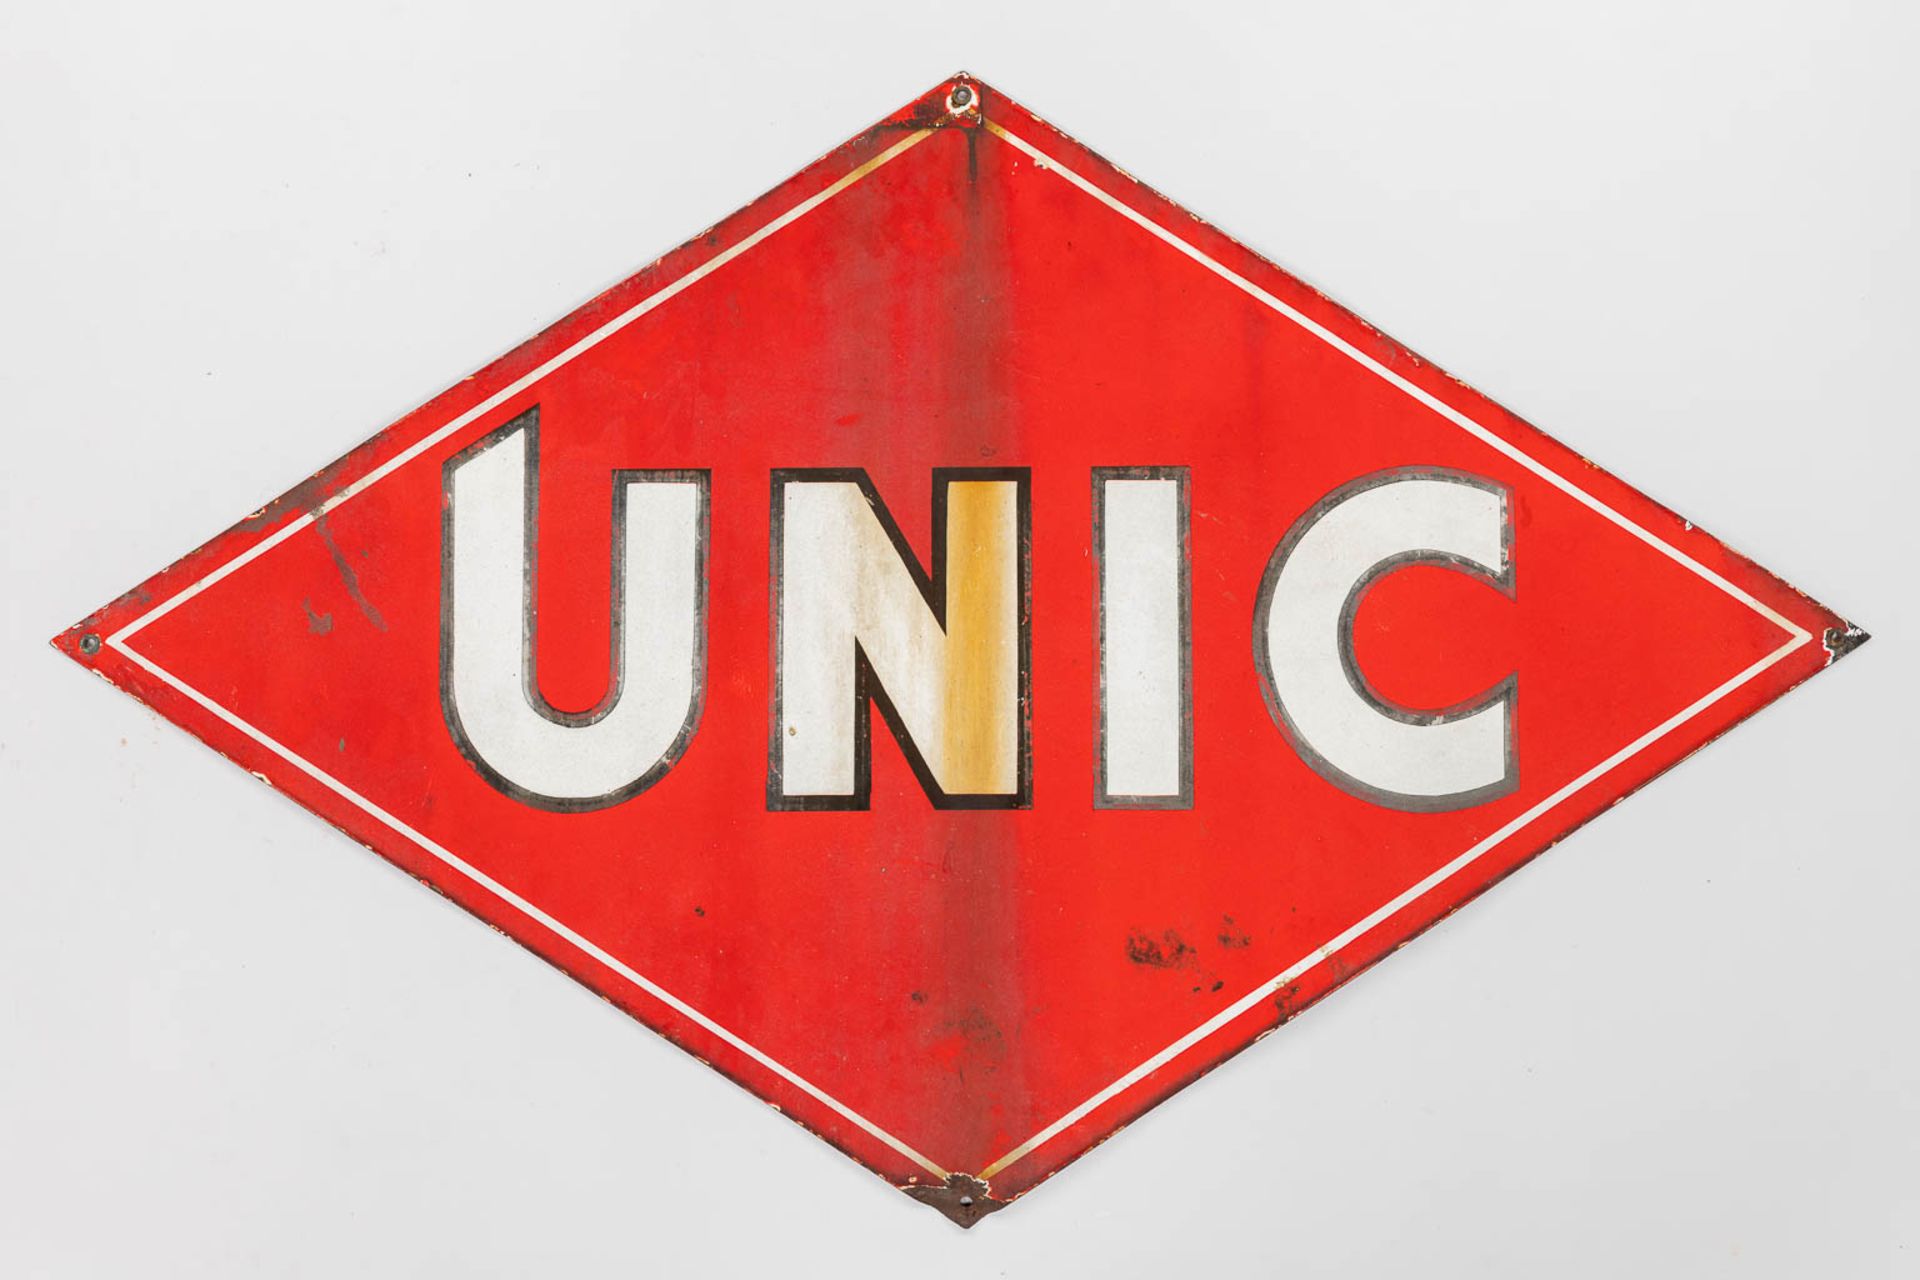 Unic, a double-faced enamelled plate. (W: 120 x H: 76 cm) - Image 7 of 11